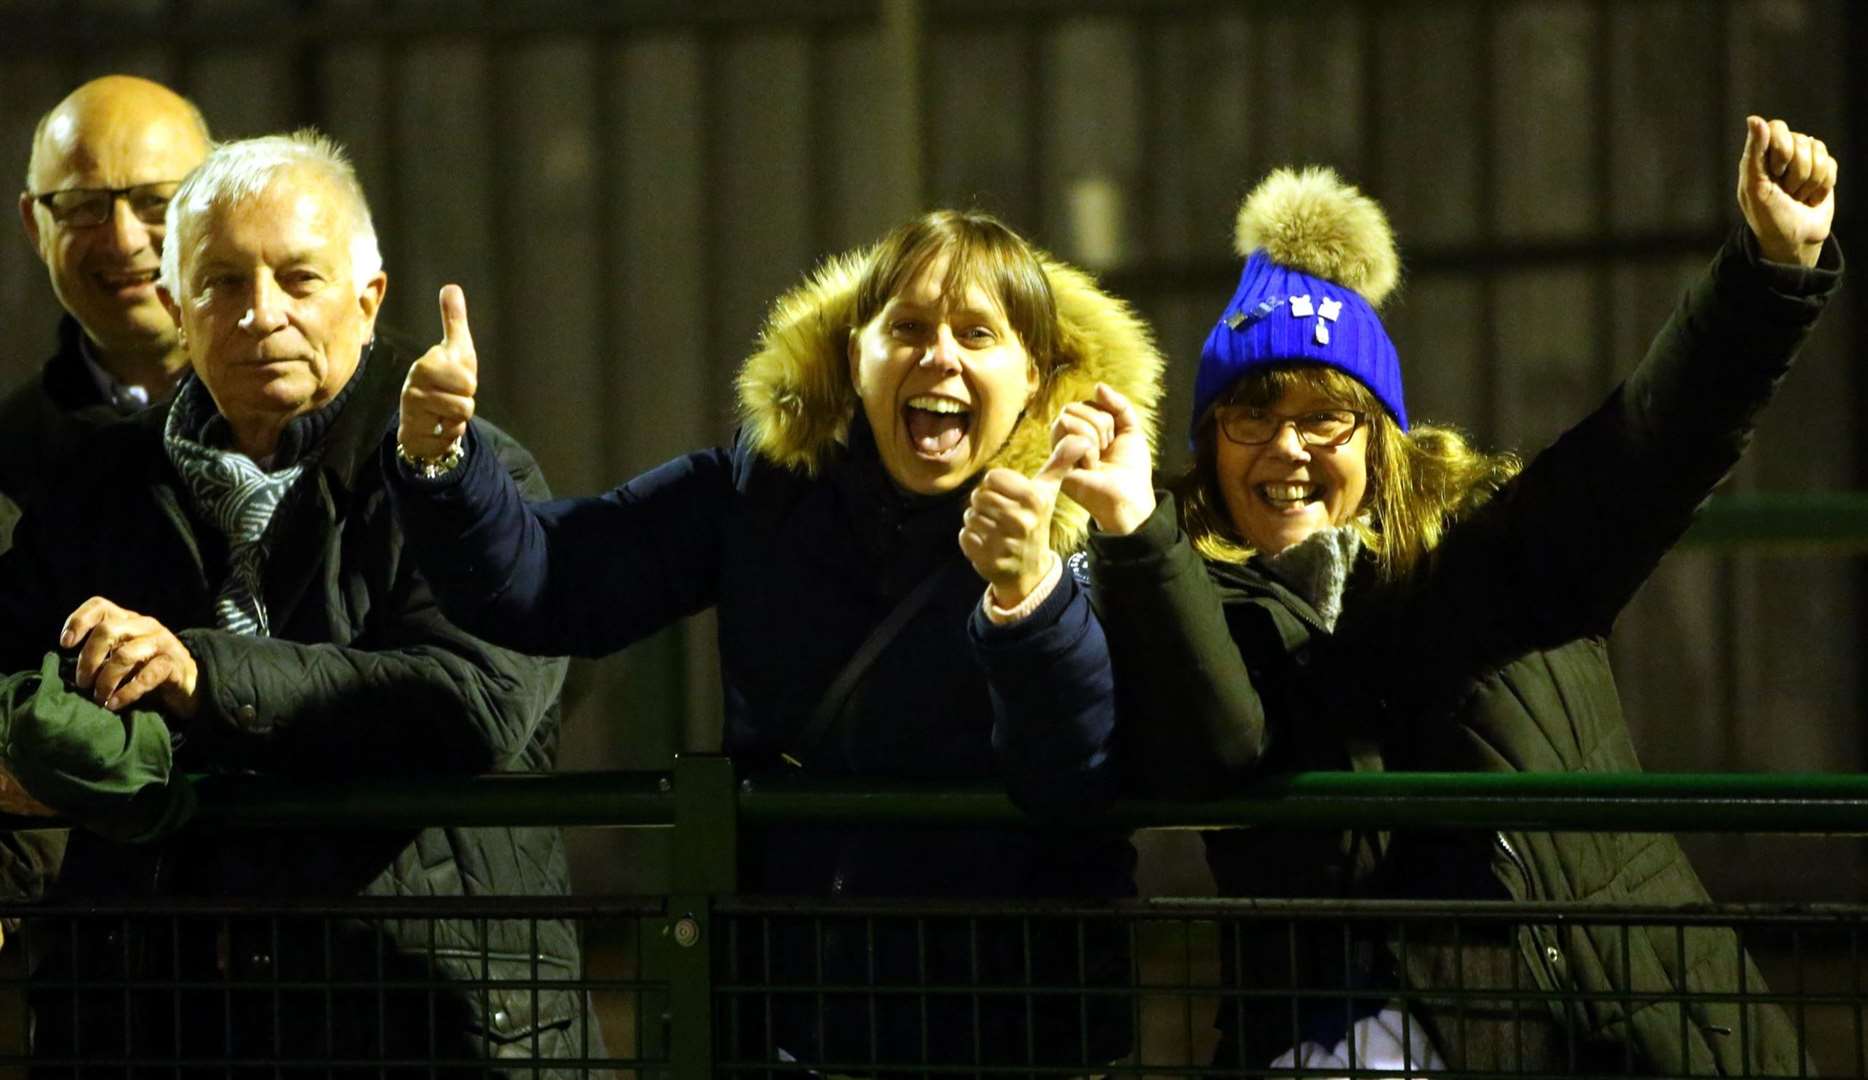 Angels fans celebrate their Bostik Premier play-off victory. Picture: David Couldridge